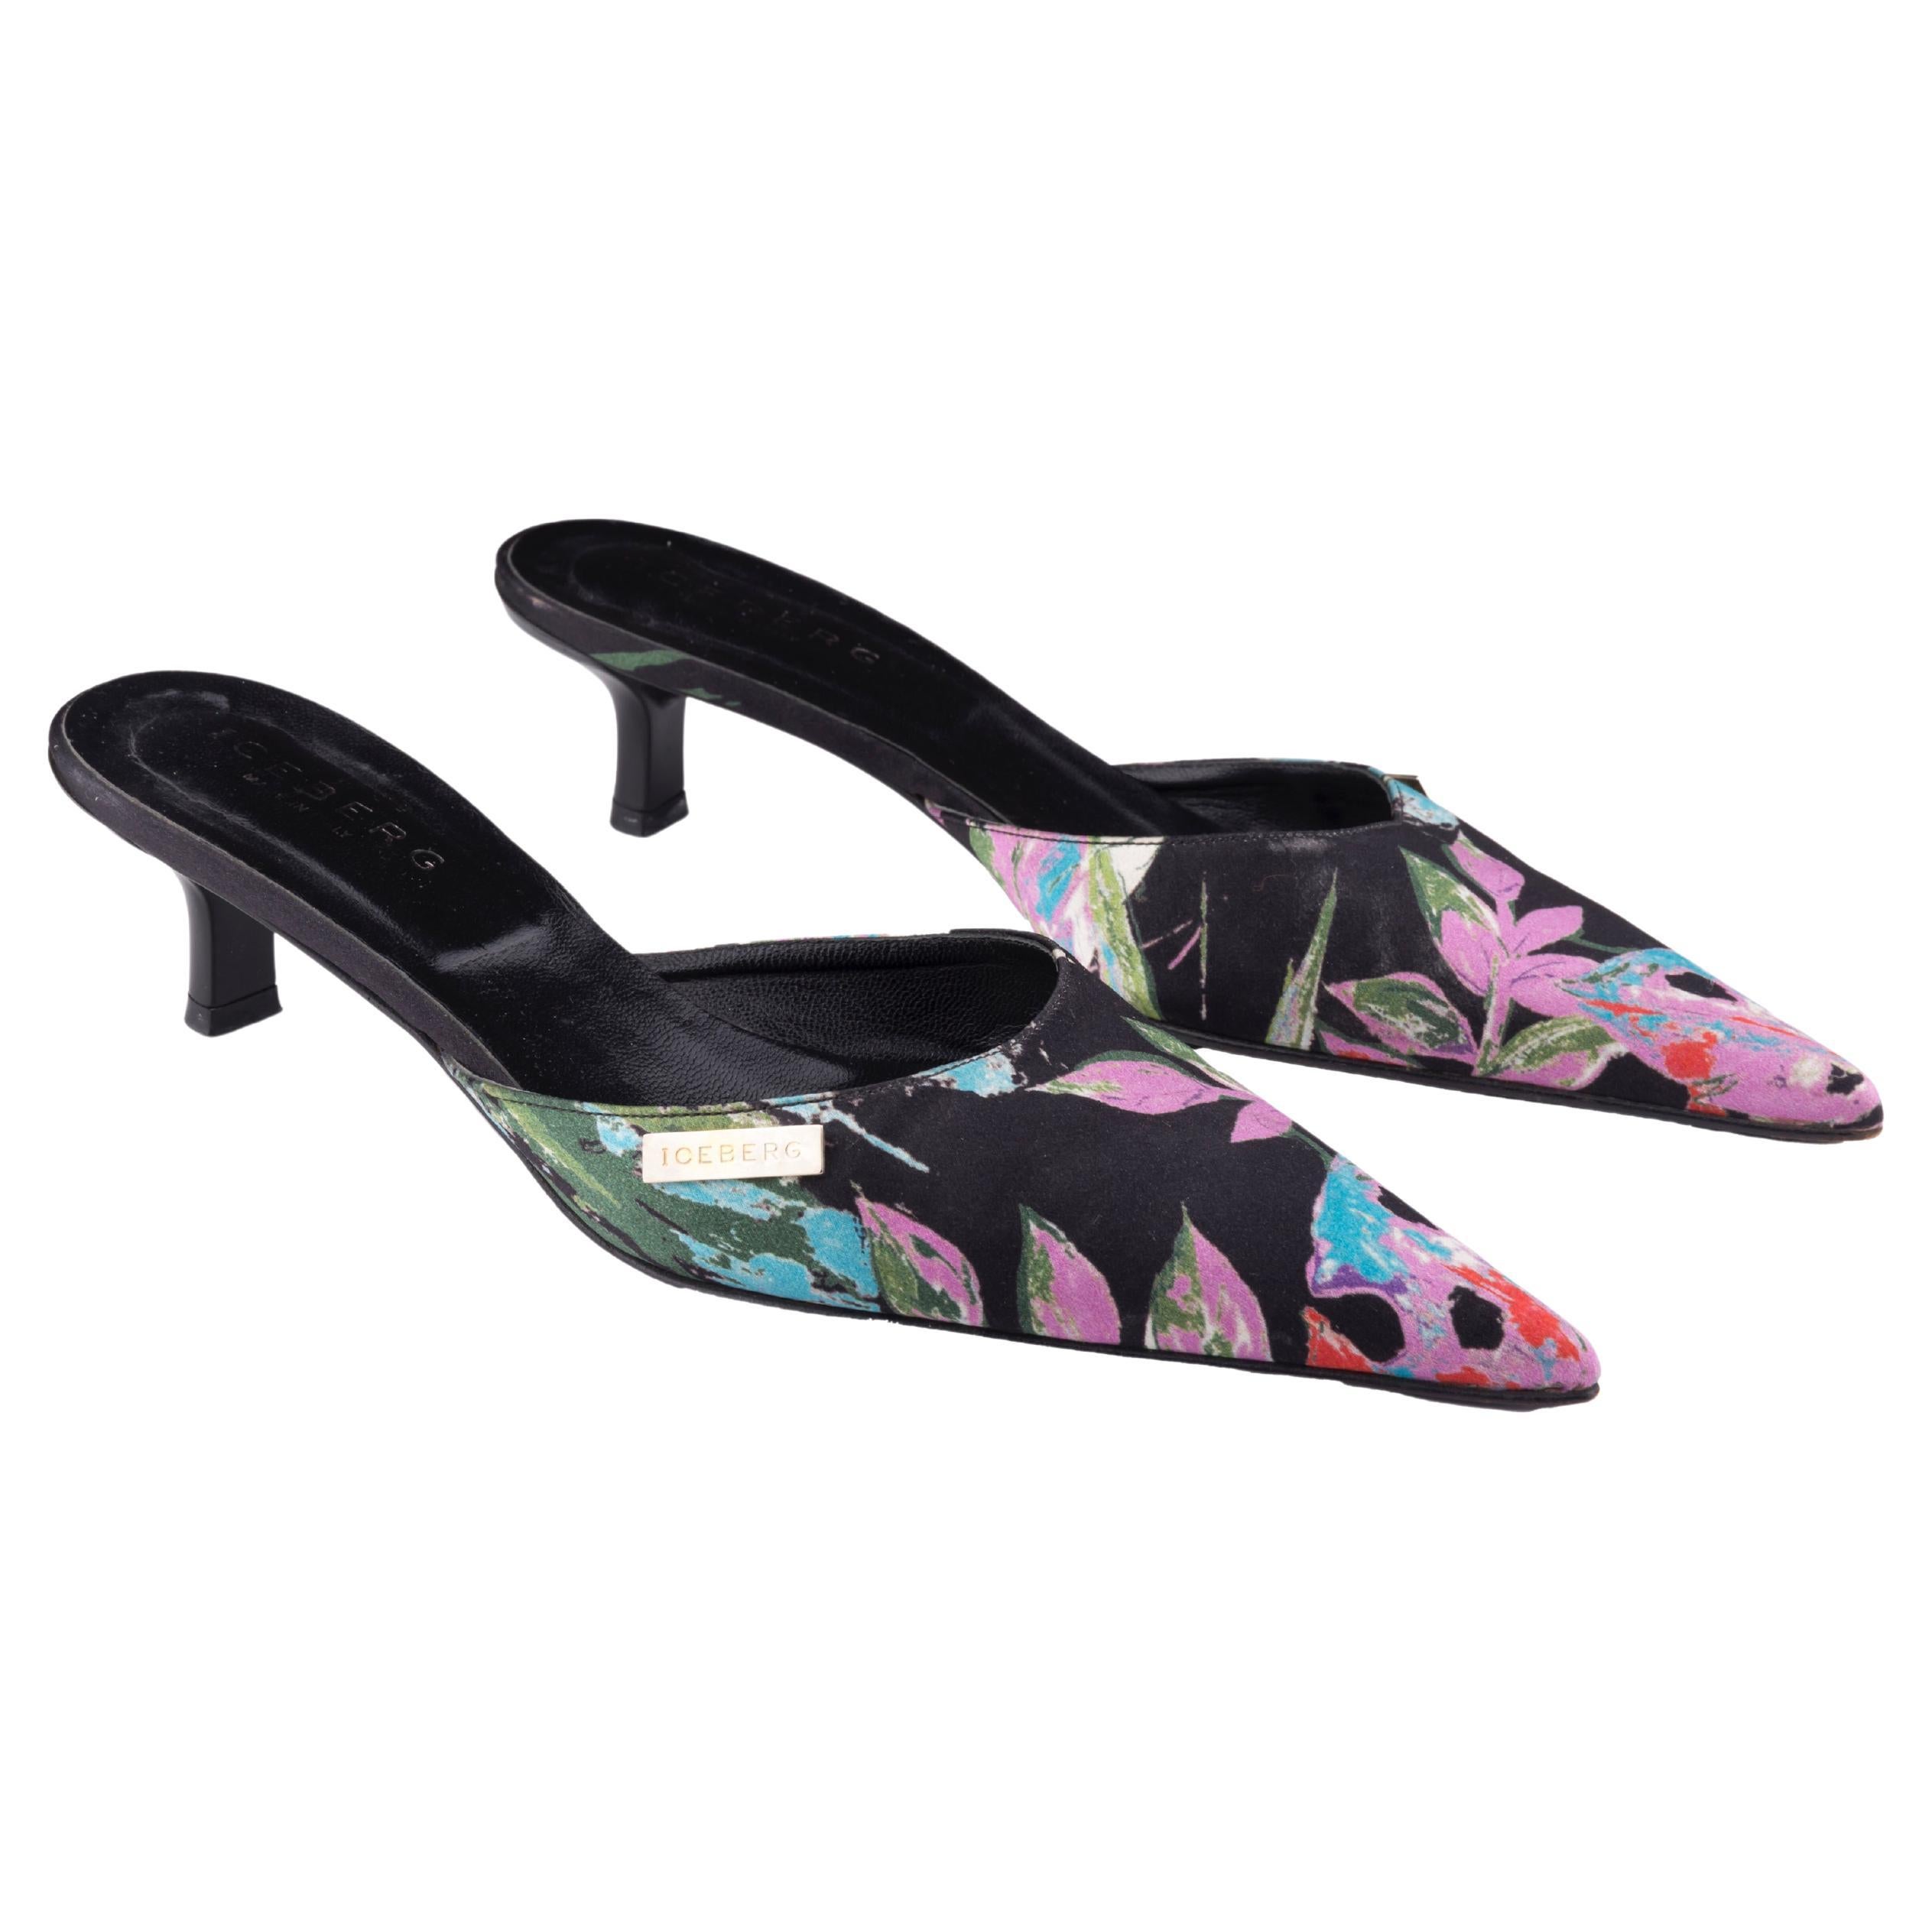 Iceberg S/S 2003 floral print mules For Sale